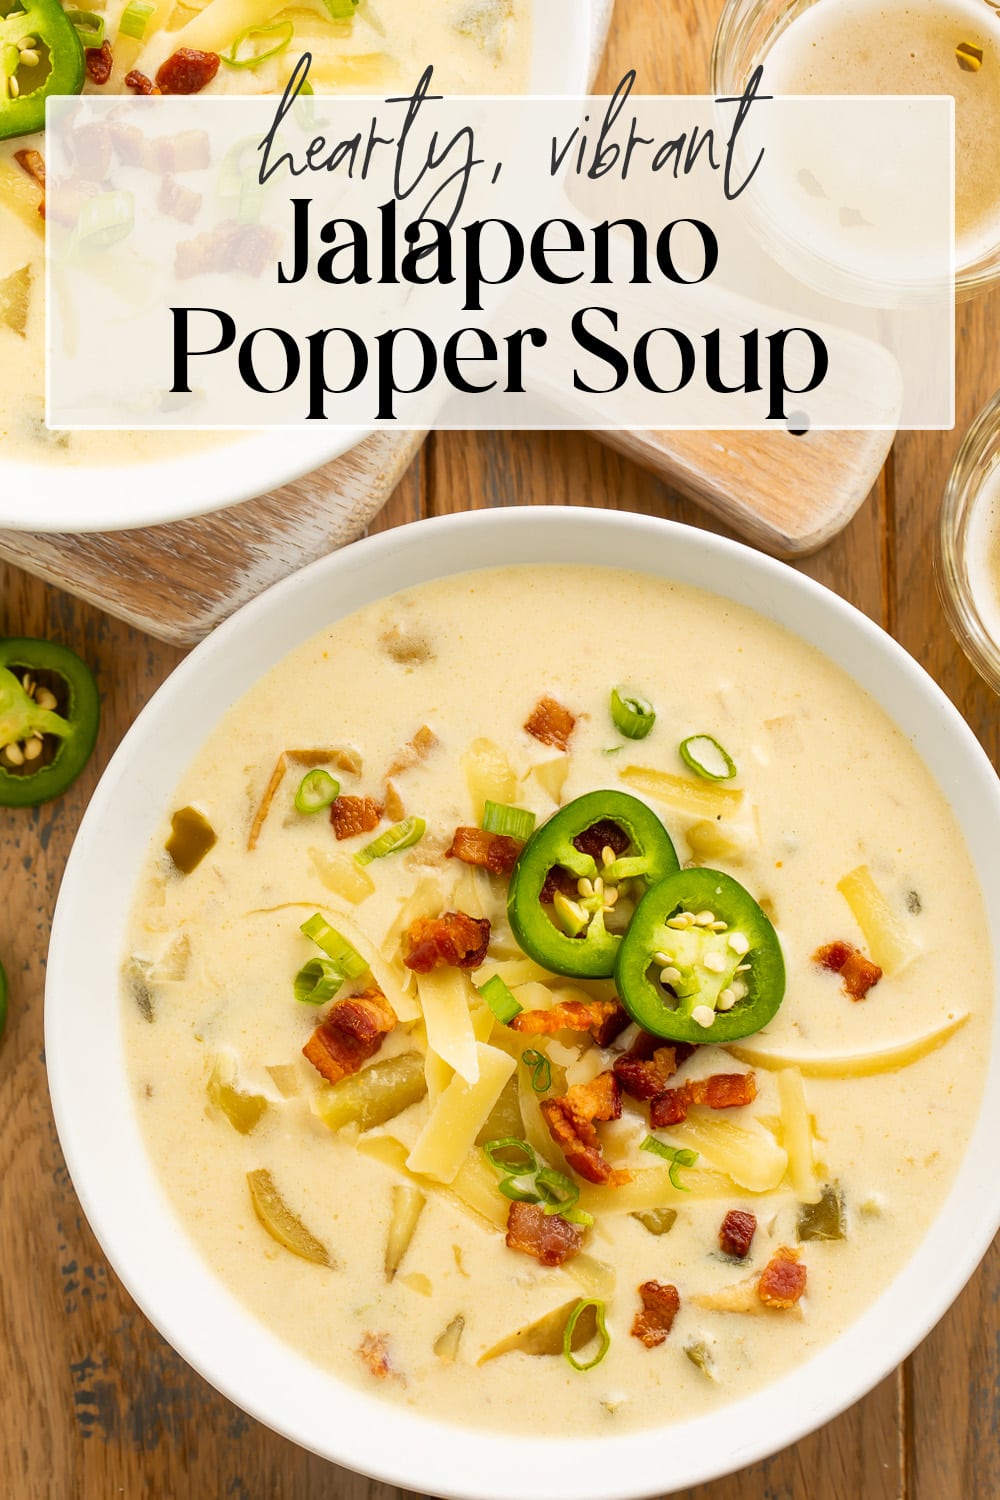 Pin graphic for jalapeño popper soup.